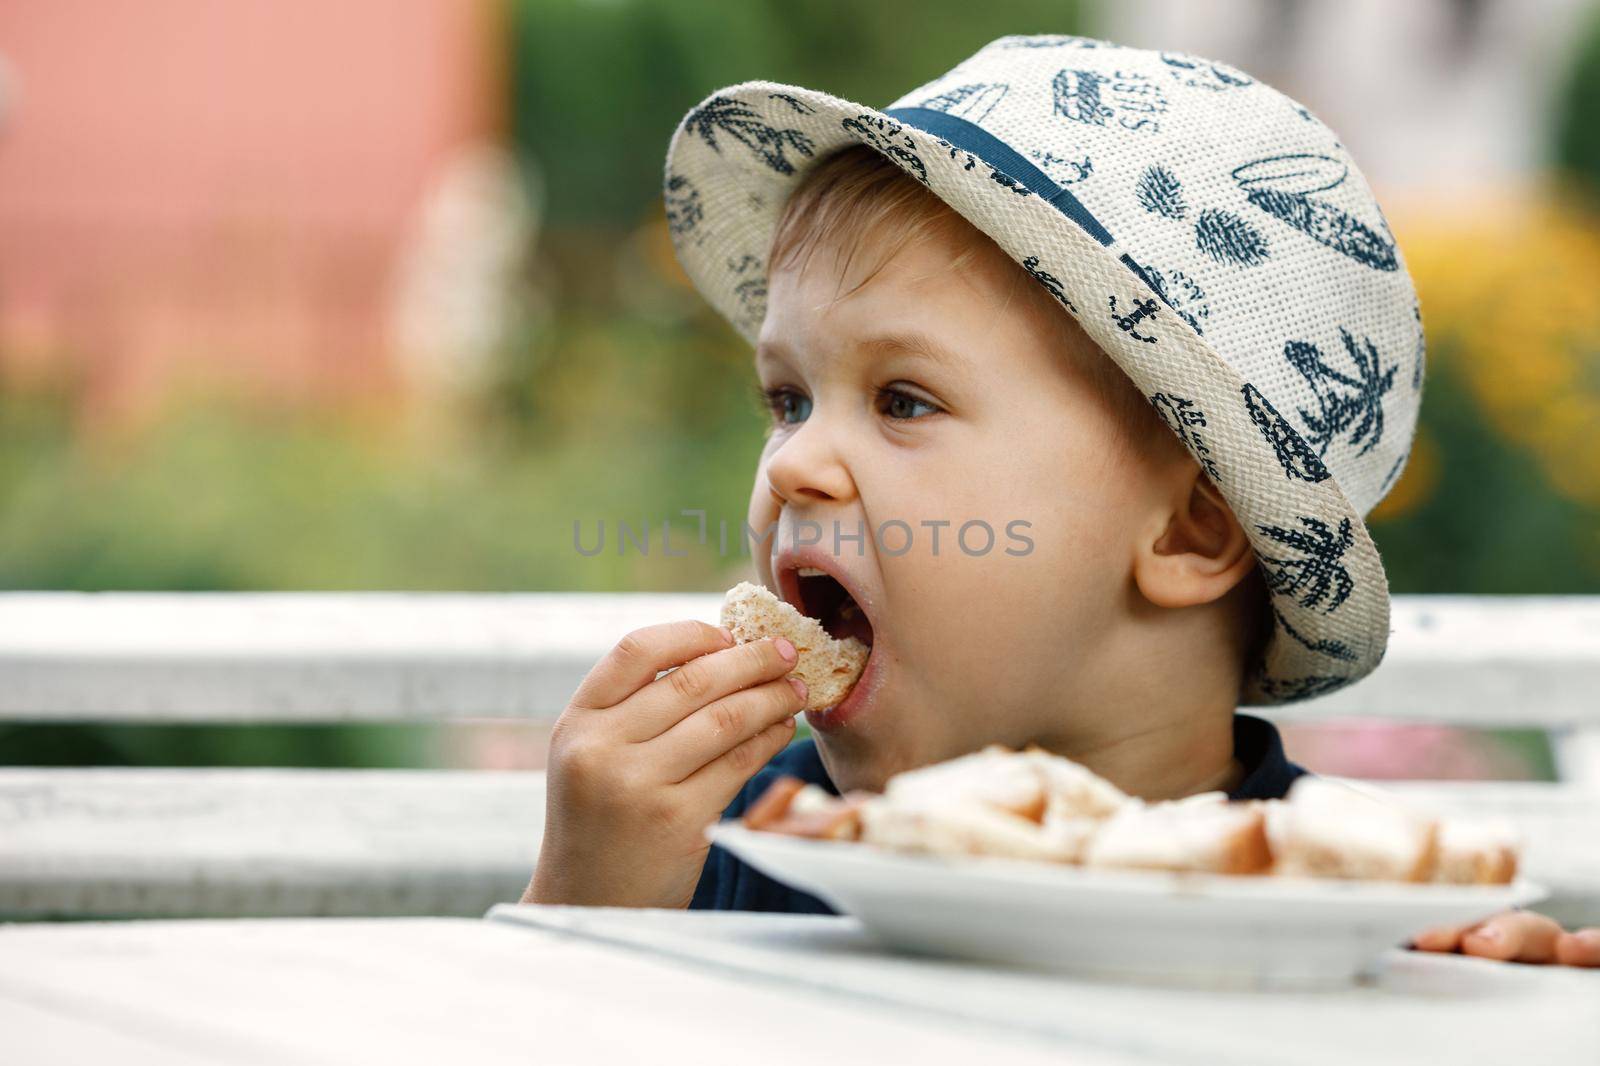 Close-up portrait of cute little child eating bread in green garden, outdoors. Summer lifestyle. Homegrown organic food. A healthy children nutrition.